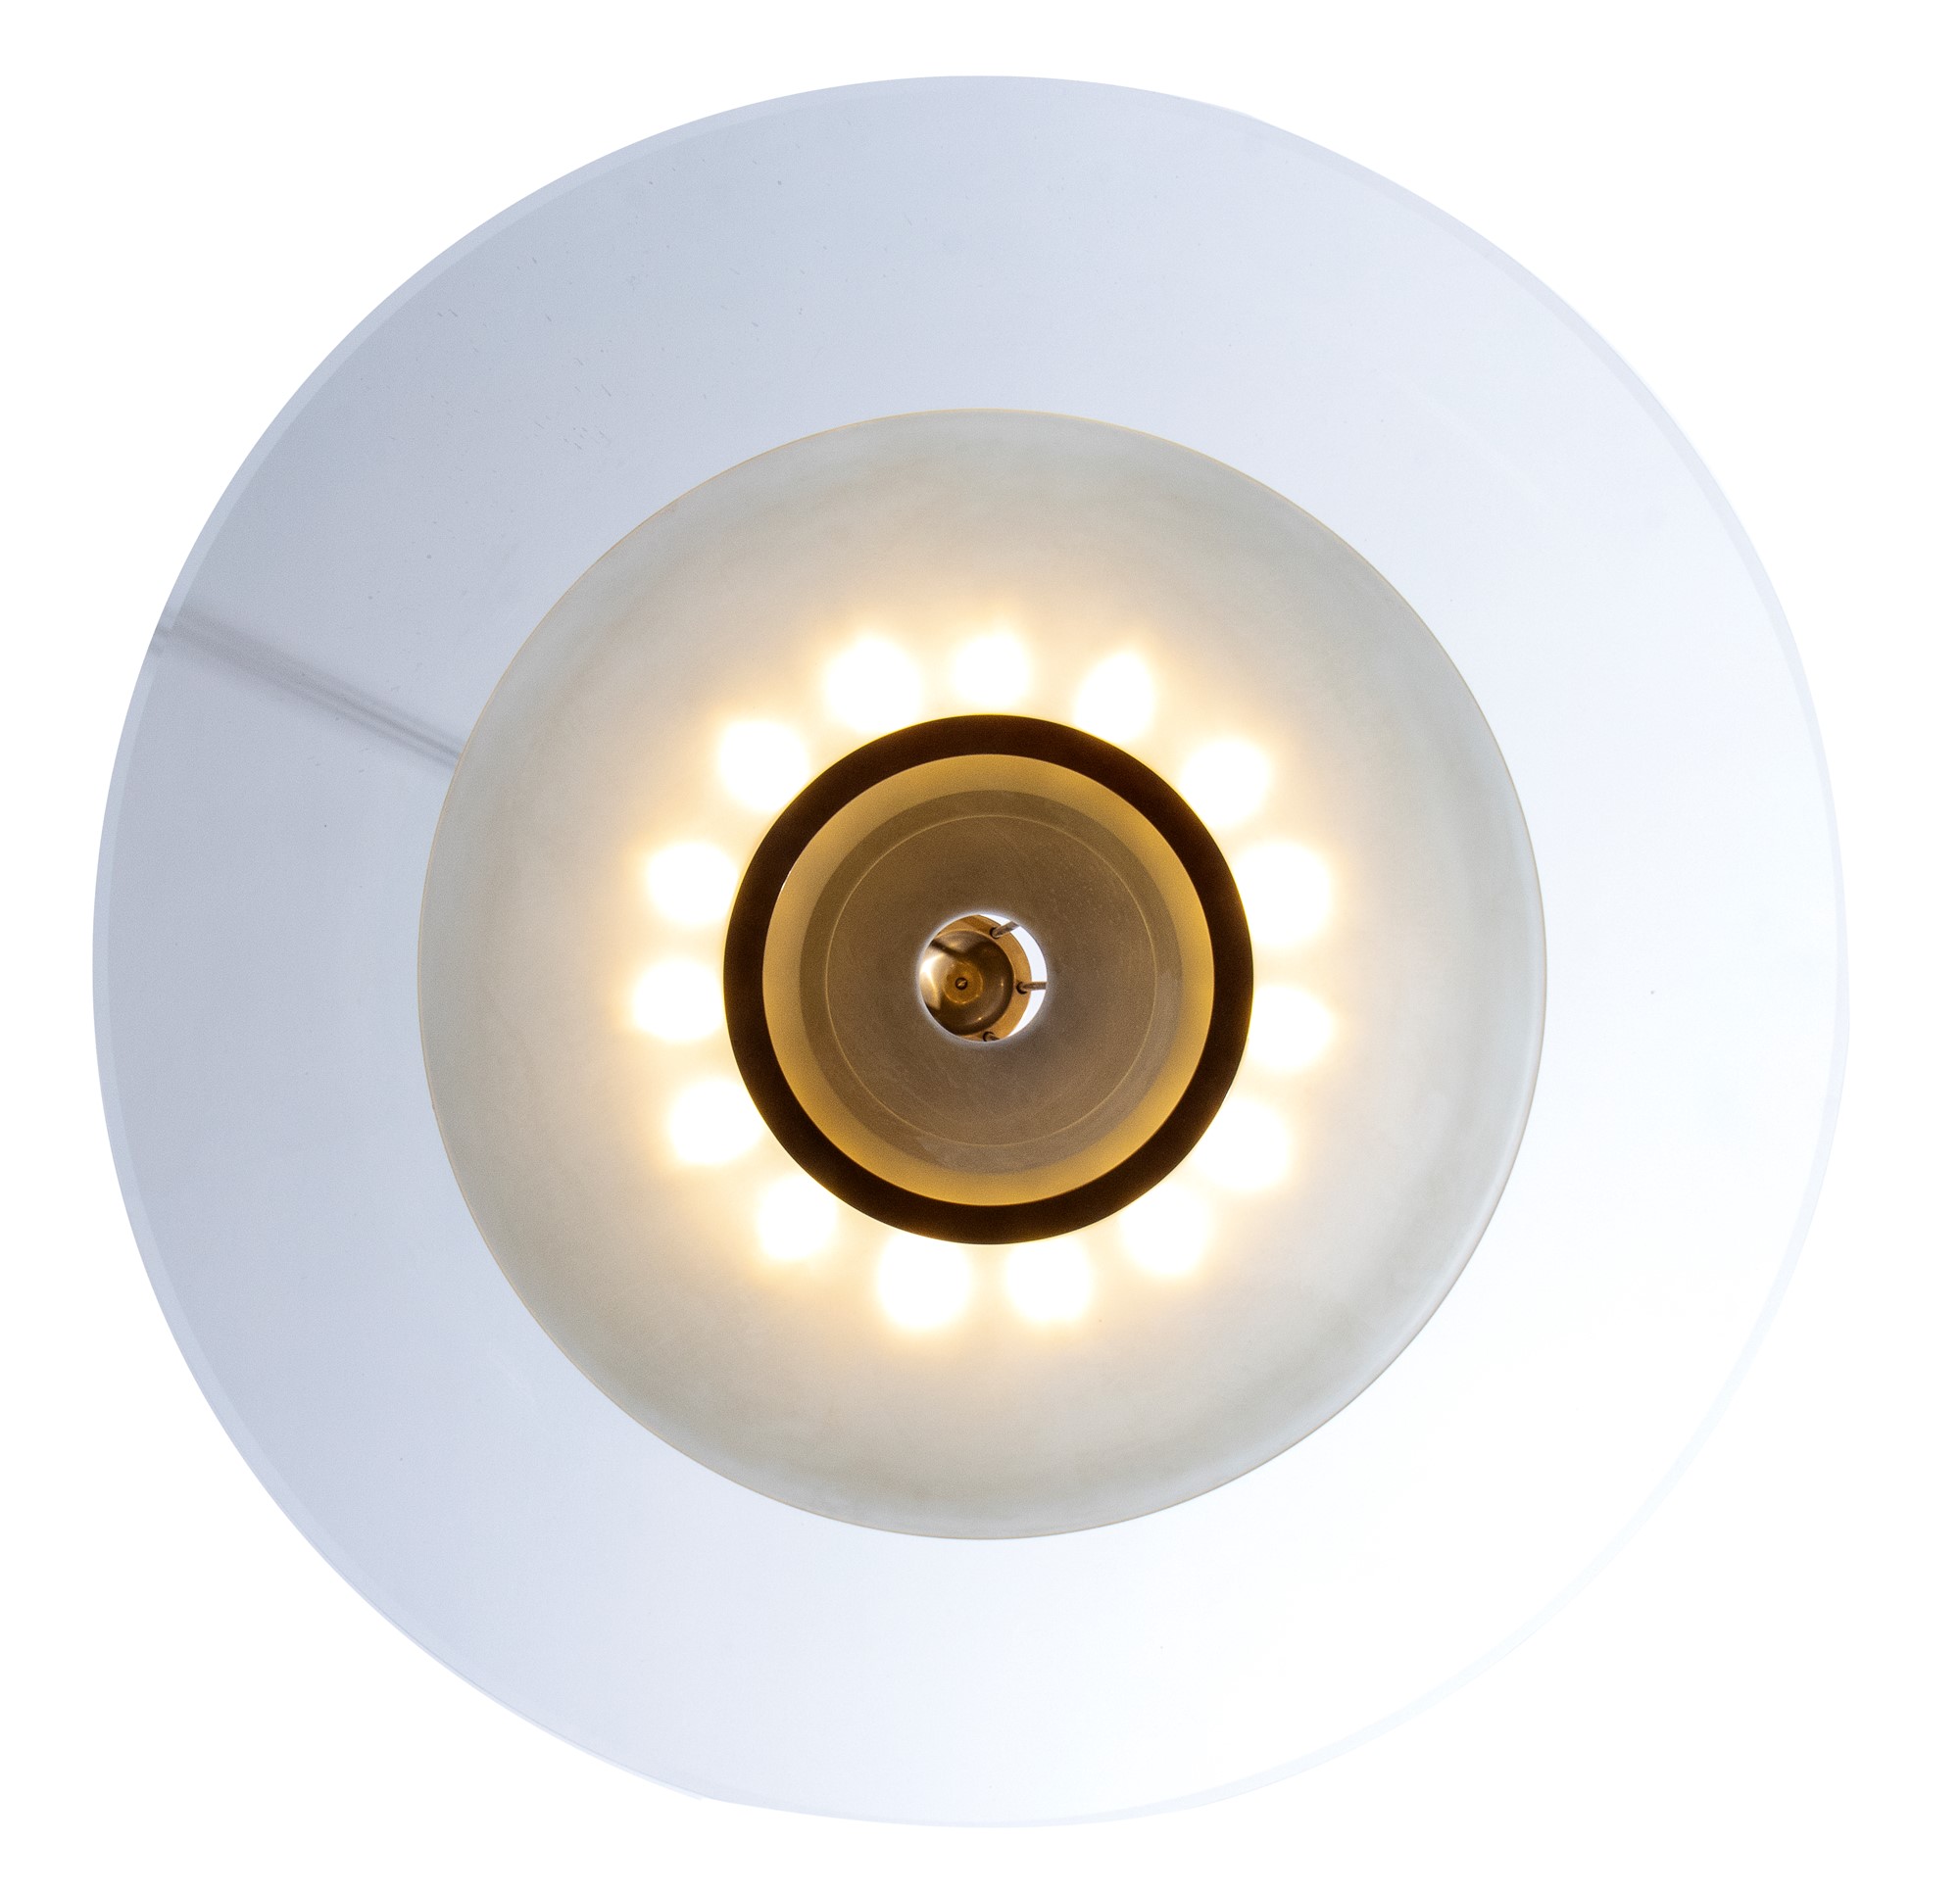 Max Ingrand Ceiling lamp mod. 1498 with brass structure, satin glass screen and crystal cup - Image 14 of 19